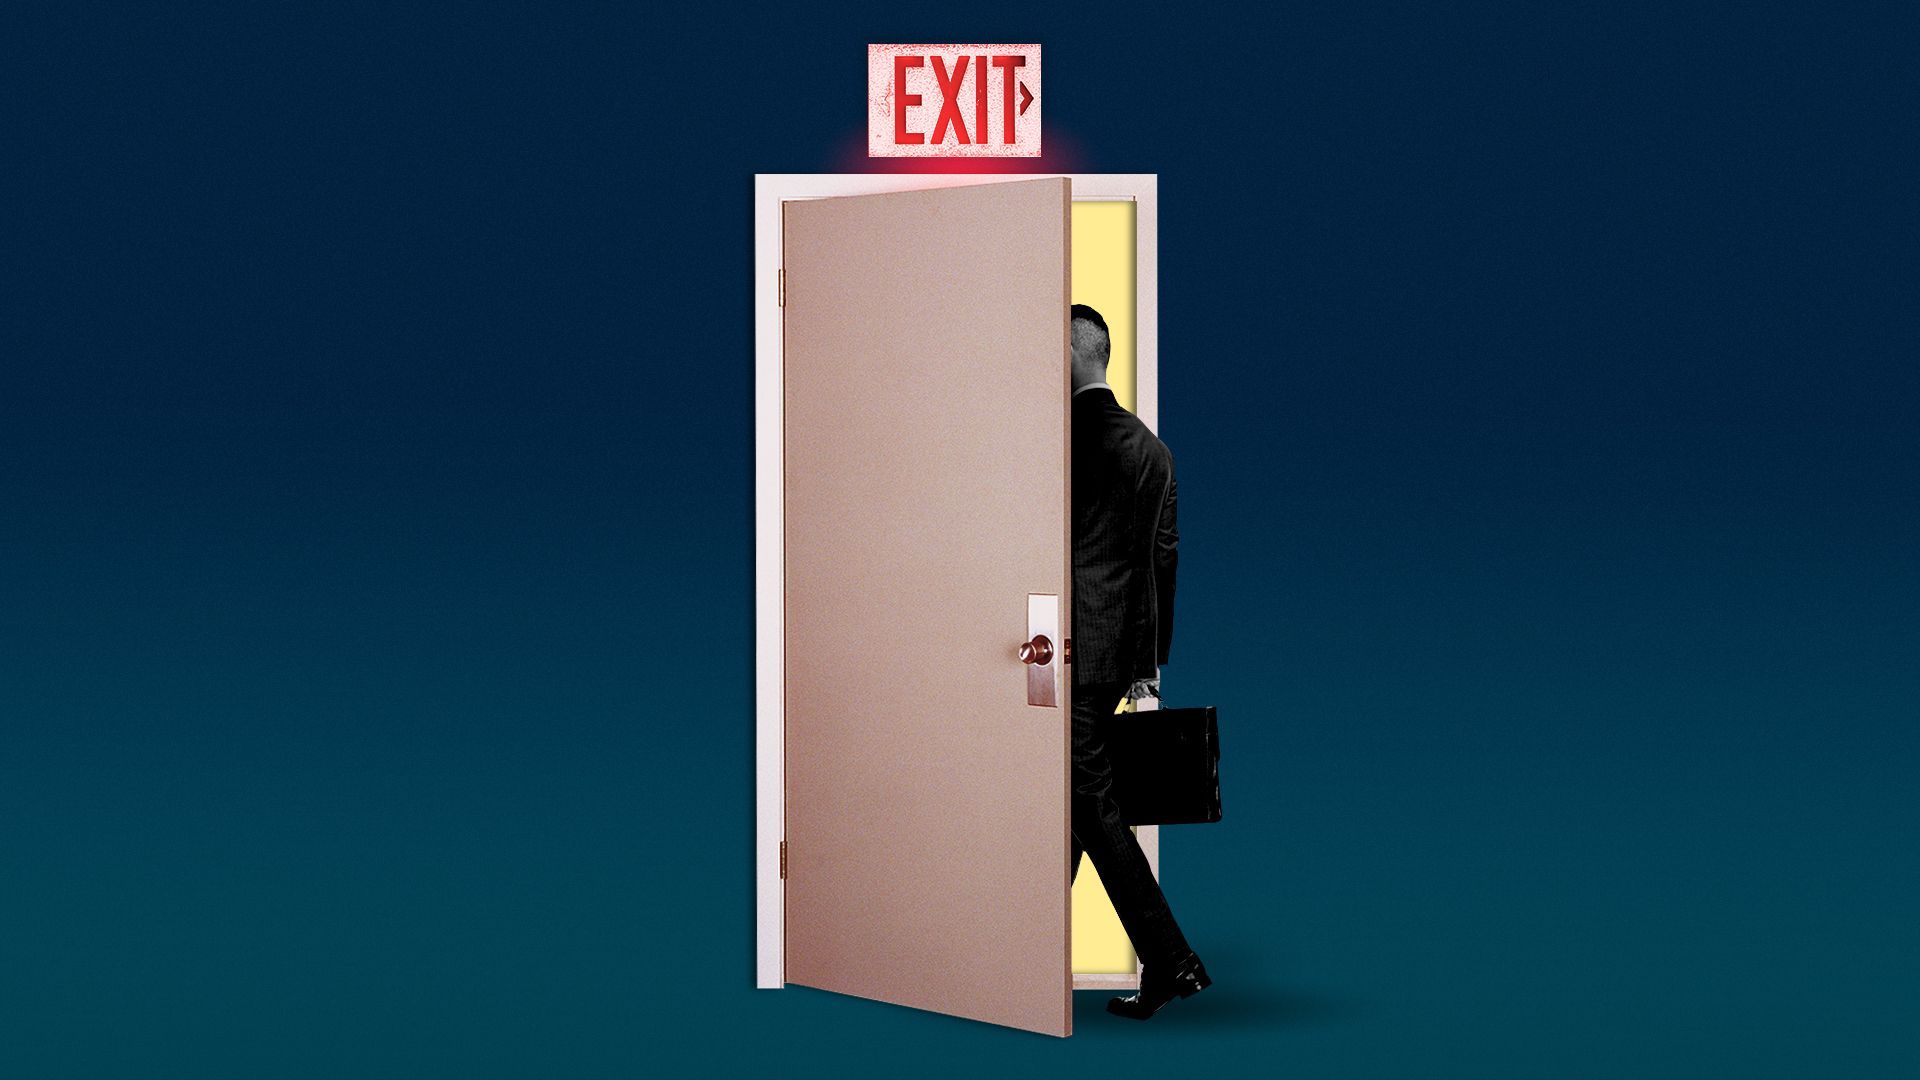 Illustration of a corporate worker exiting through a door